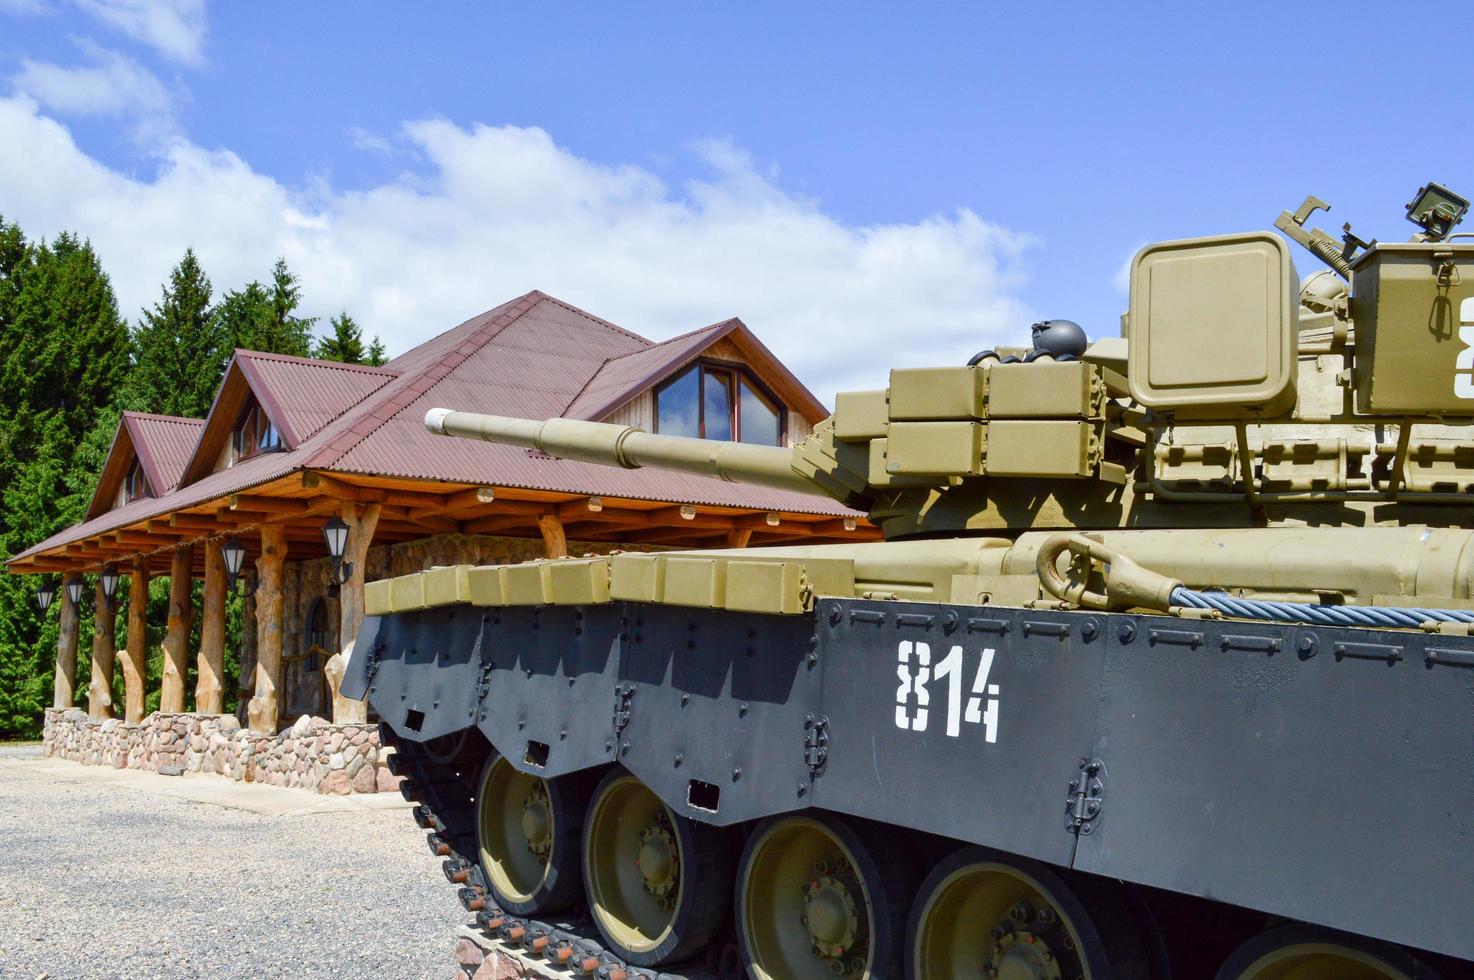 A large green military iron metal battle tank with a cannon is ridden parked next to the cottage house with a red tiled roof photo